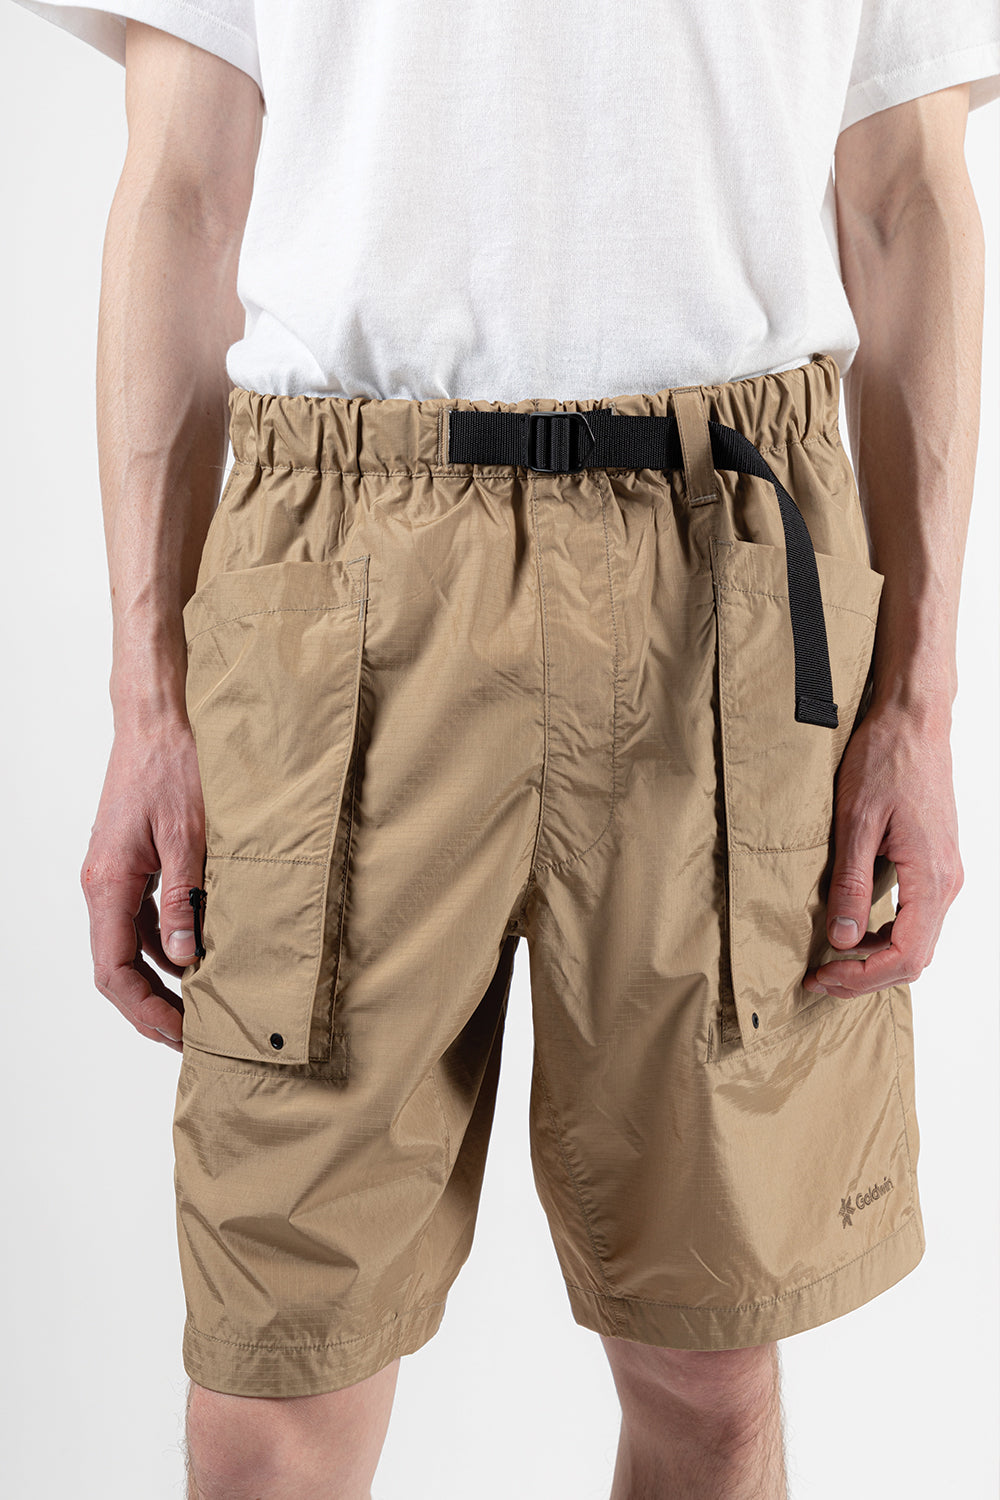 Rip-Stop Mount Cargo Shorts - Clay Beige